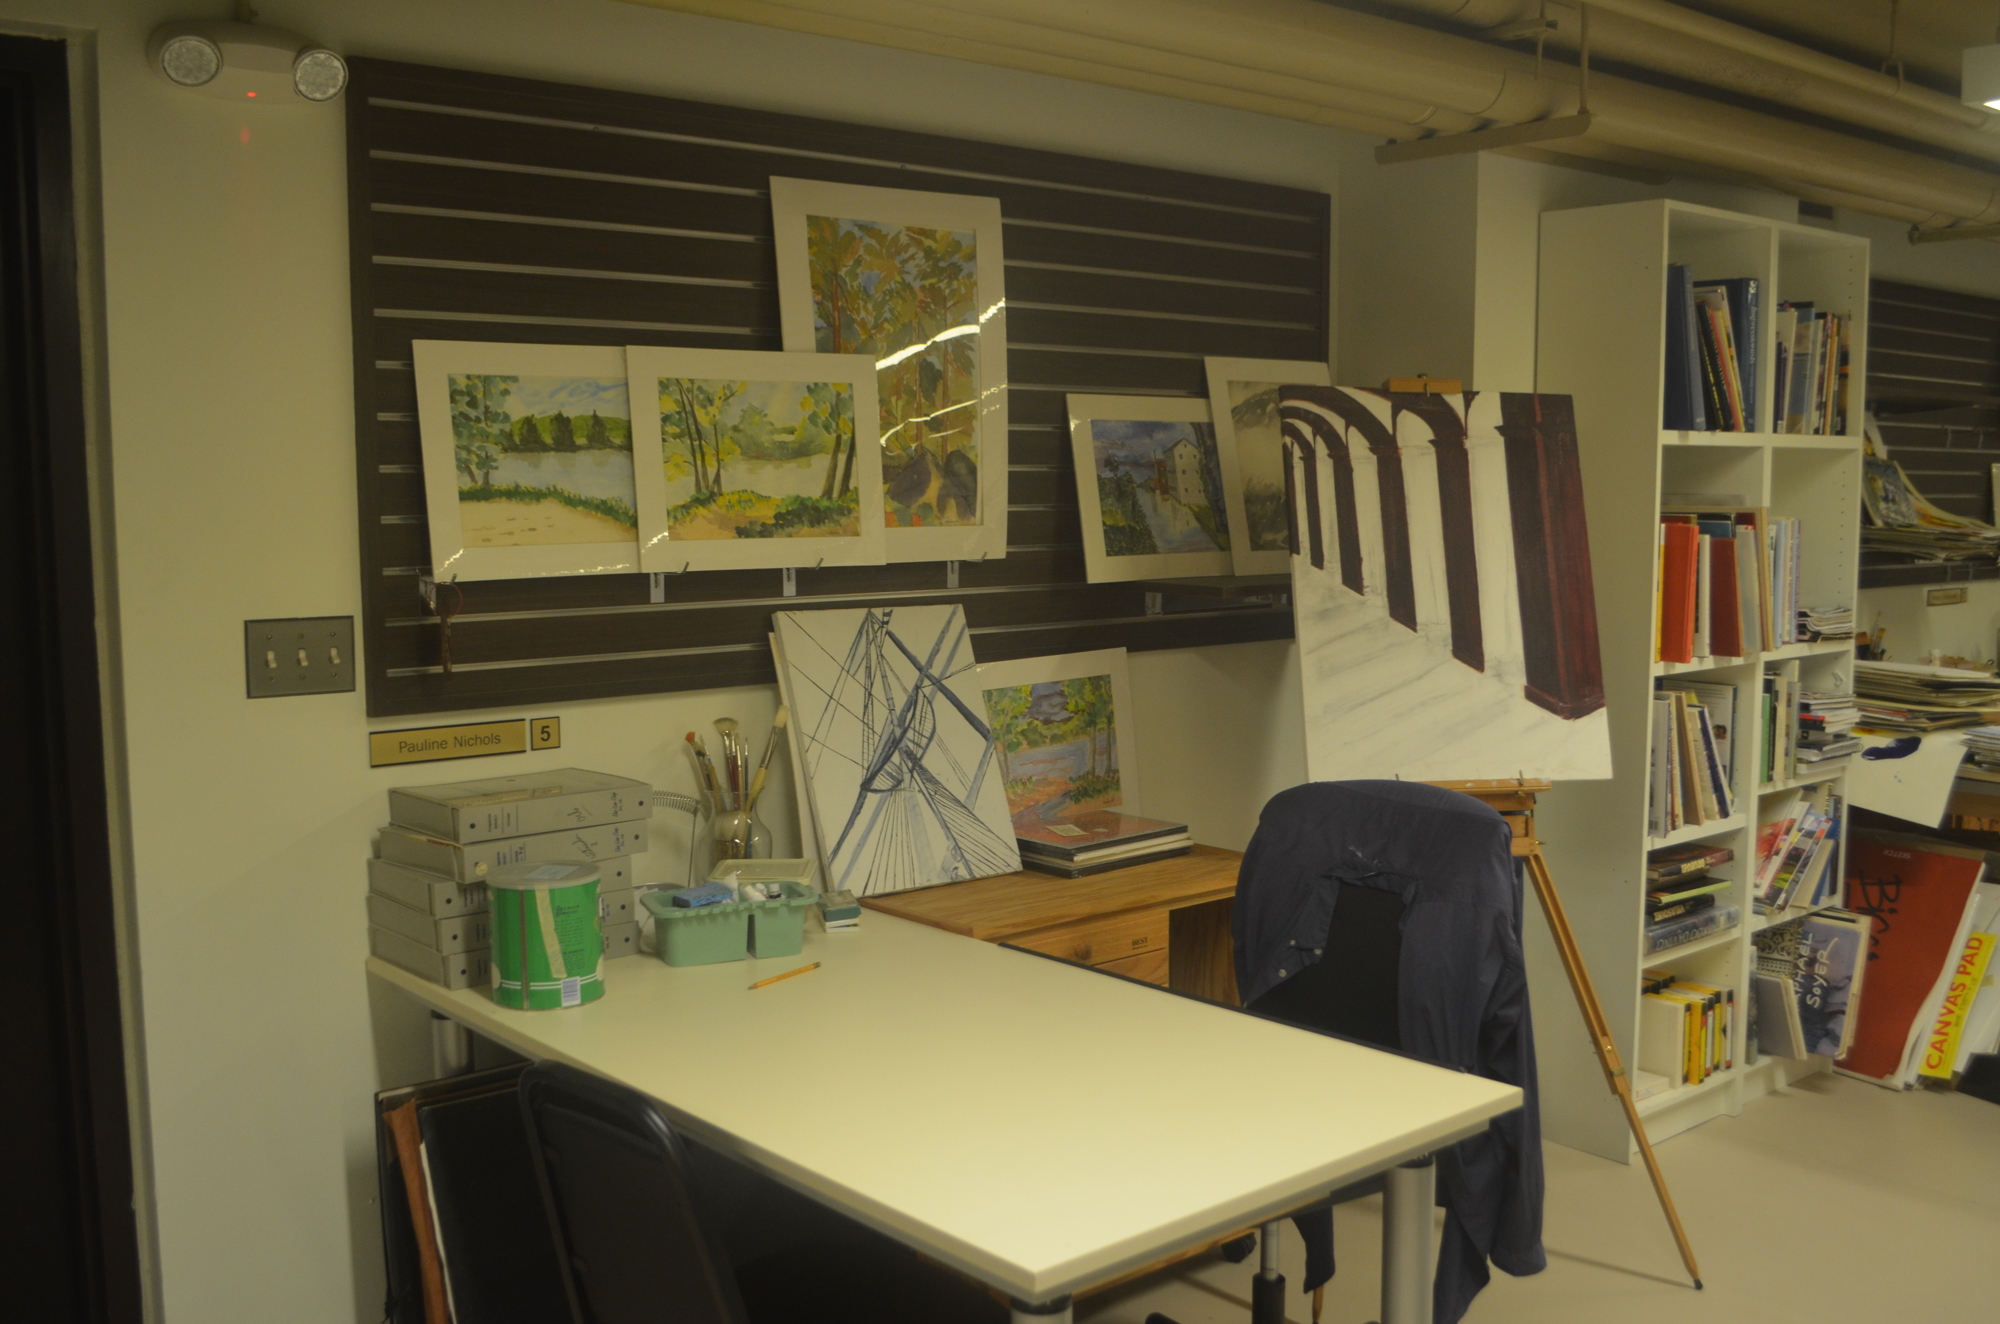 Pauline Nichols' work space in the art room of Plymouth Harbor. She hopes to finish a painting of Italy next.